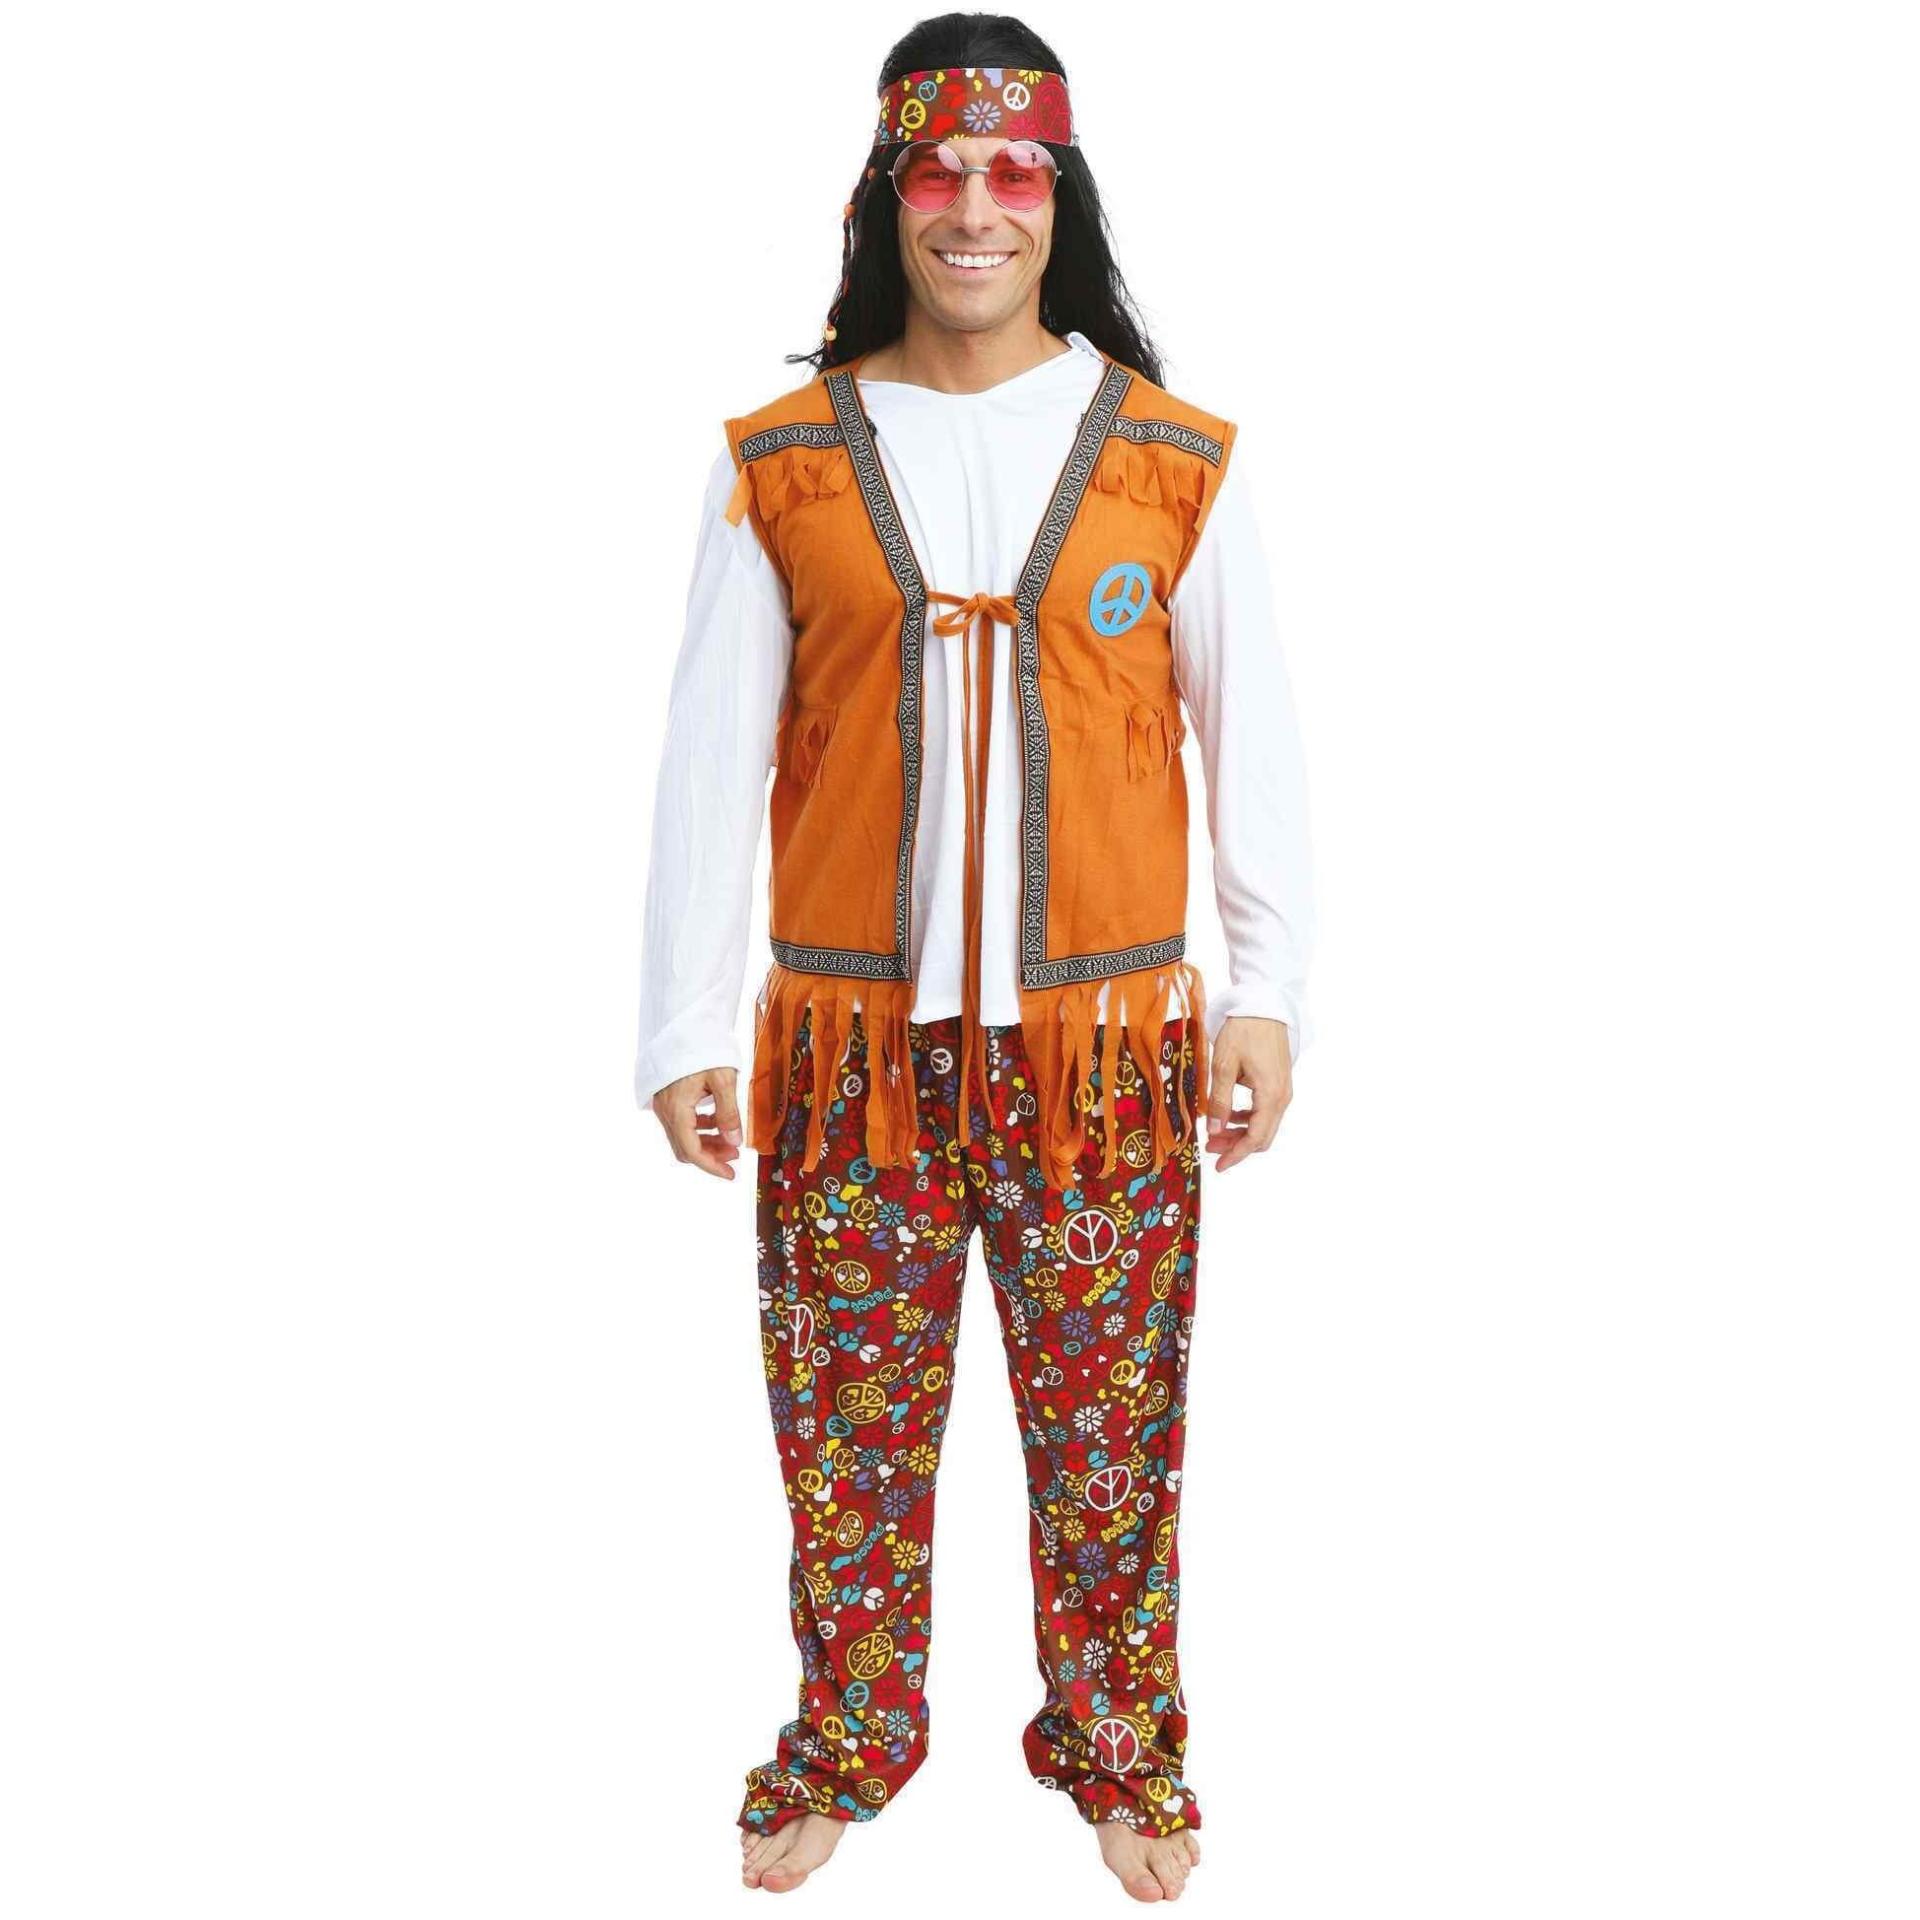 Costume adulte homme Hippie taille L/XL REF/21158